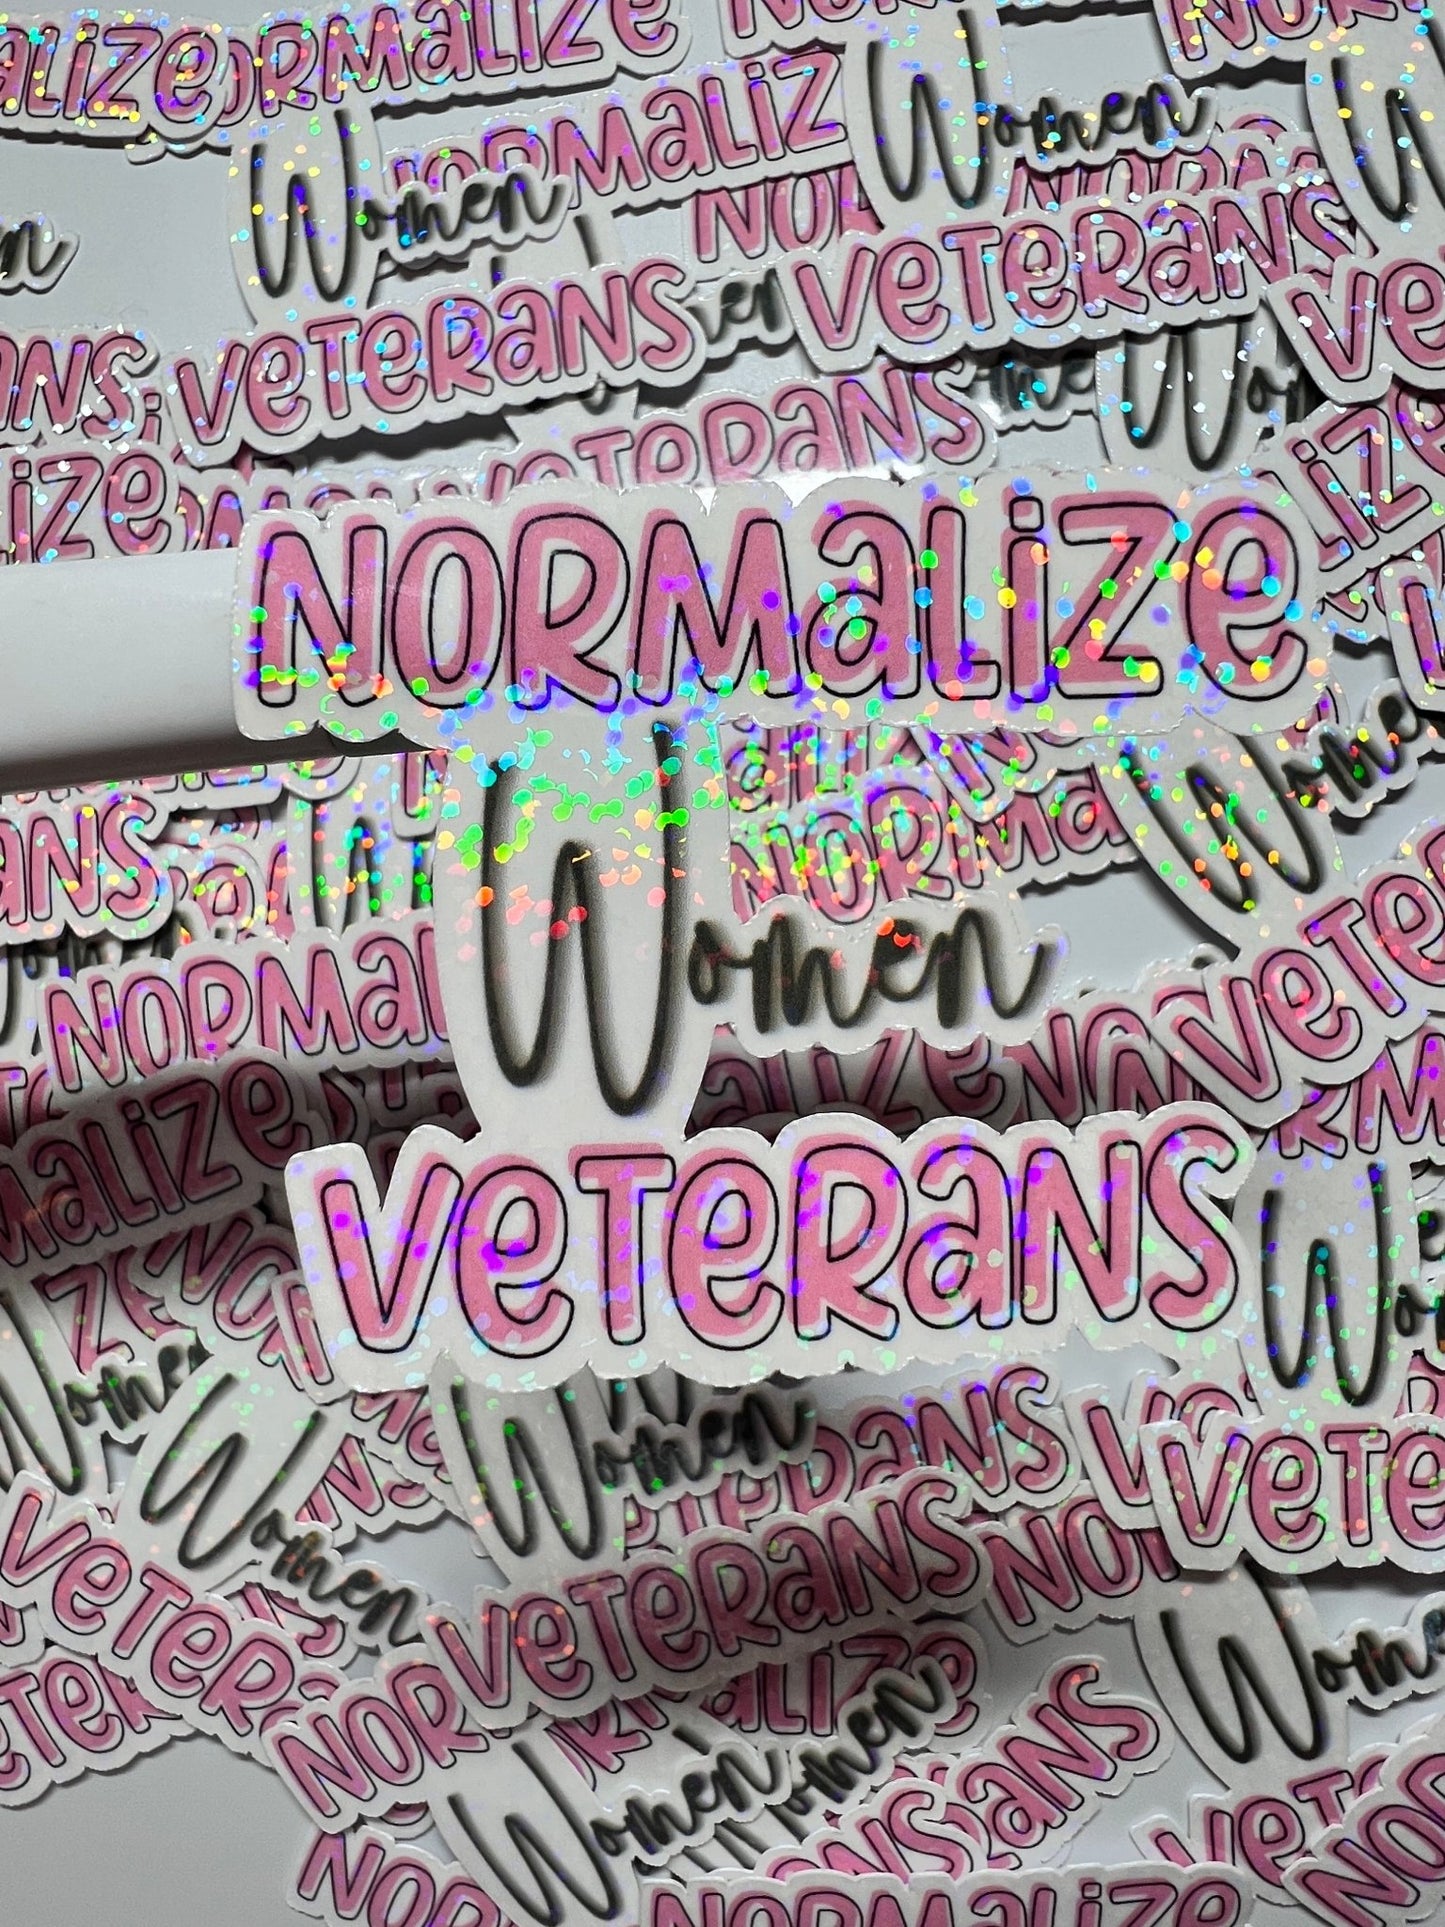 Normalize Women Veteran Sticker in Pink and Green - Haute Honorcolor